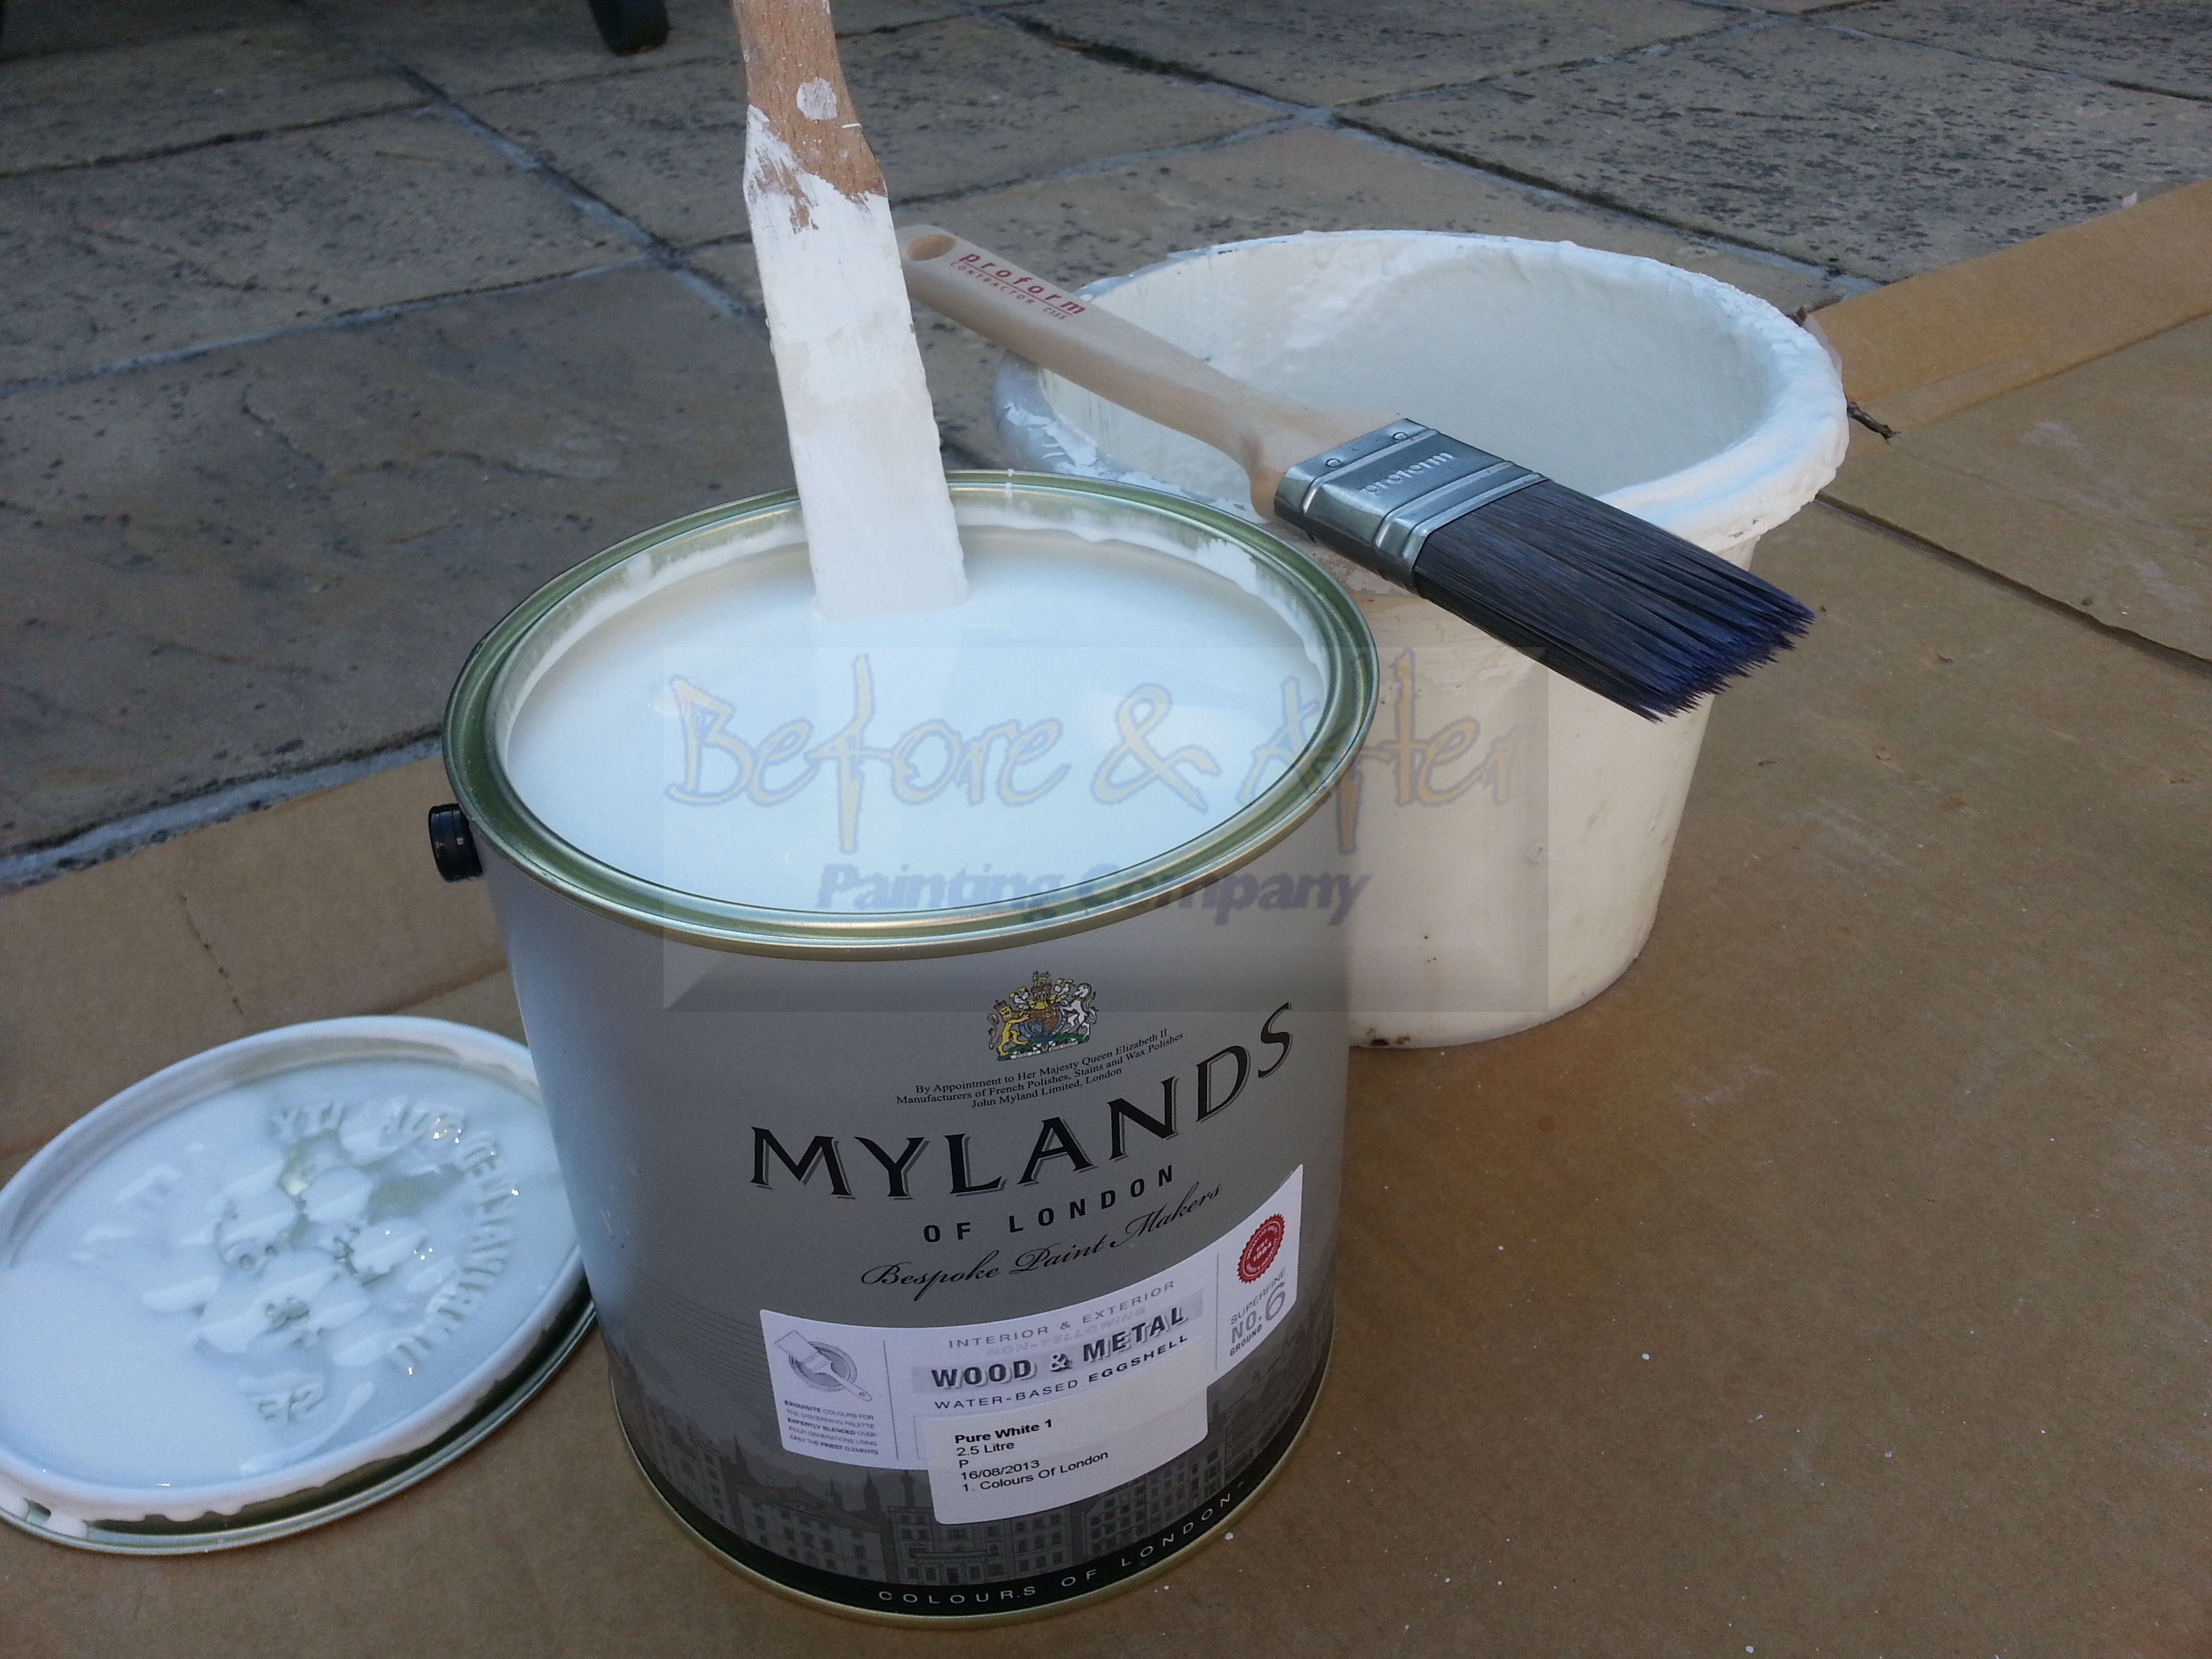 One of the best UK paint manufacturers around - Mylands of London